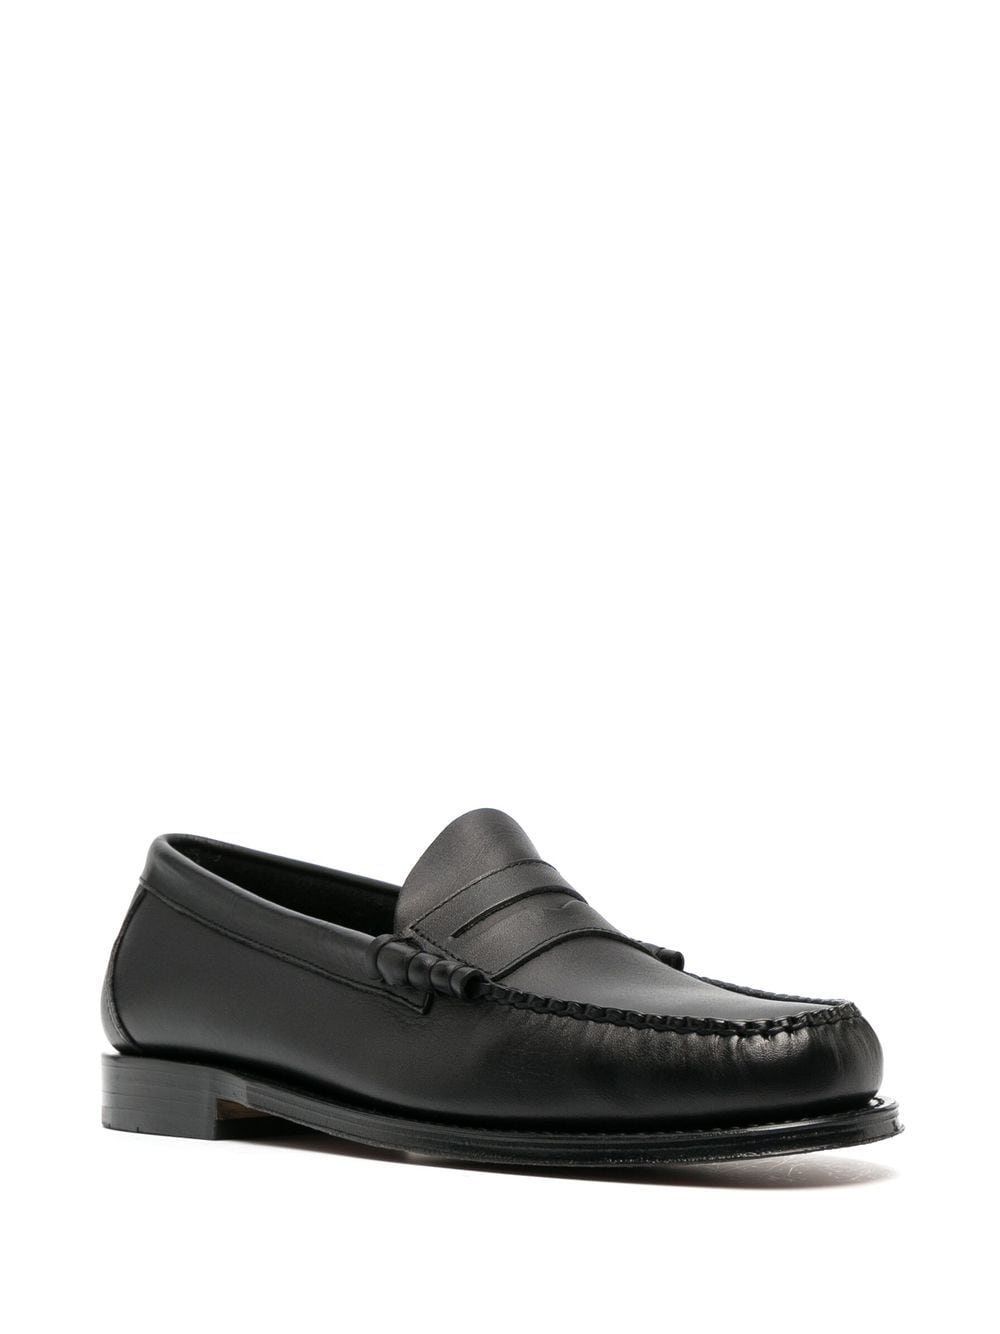 G.H. Bass & Co. Weejuns Larson Penny Loafers - Farfetch